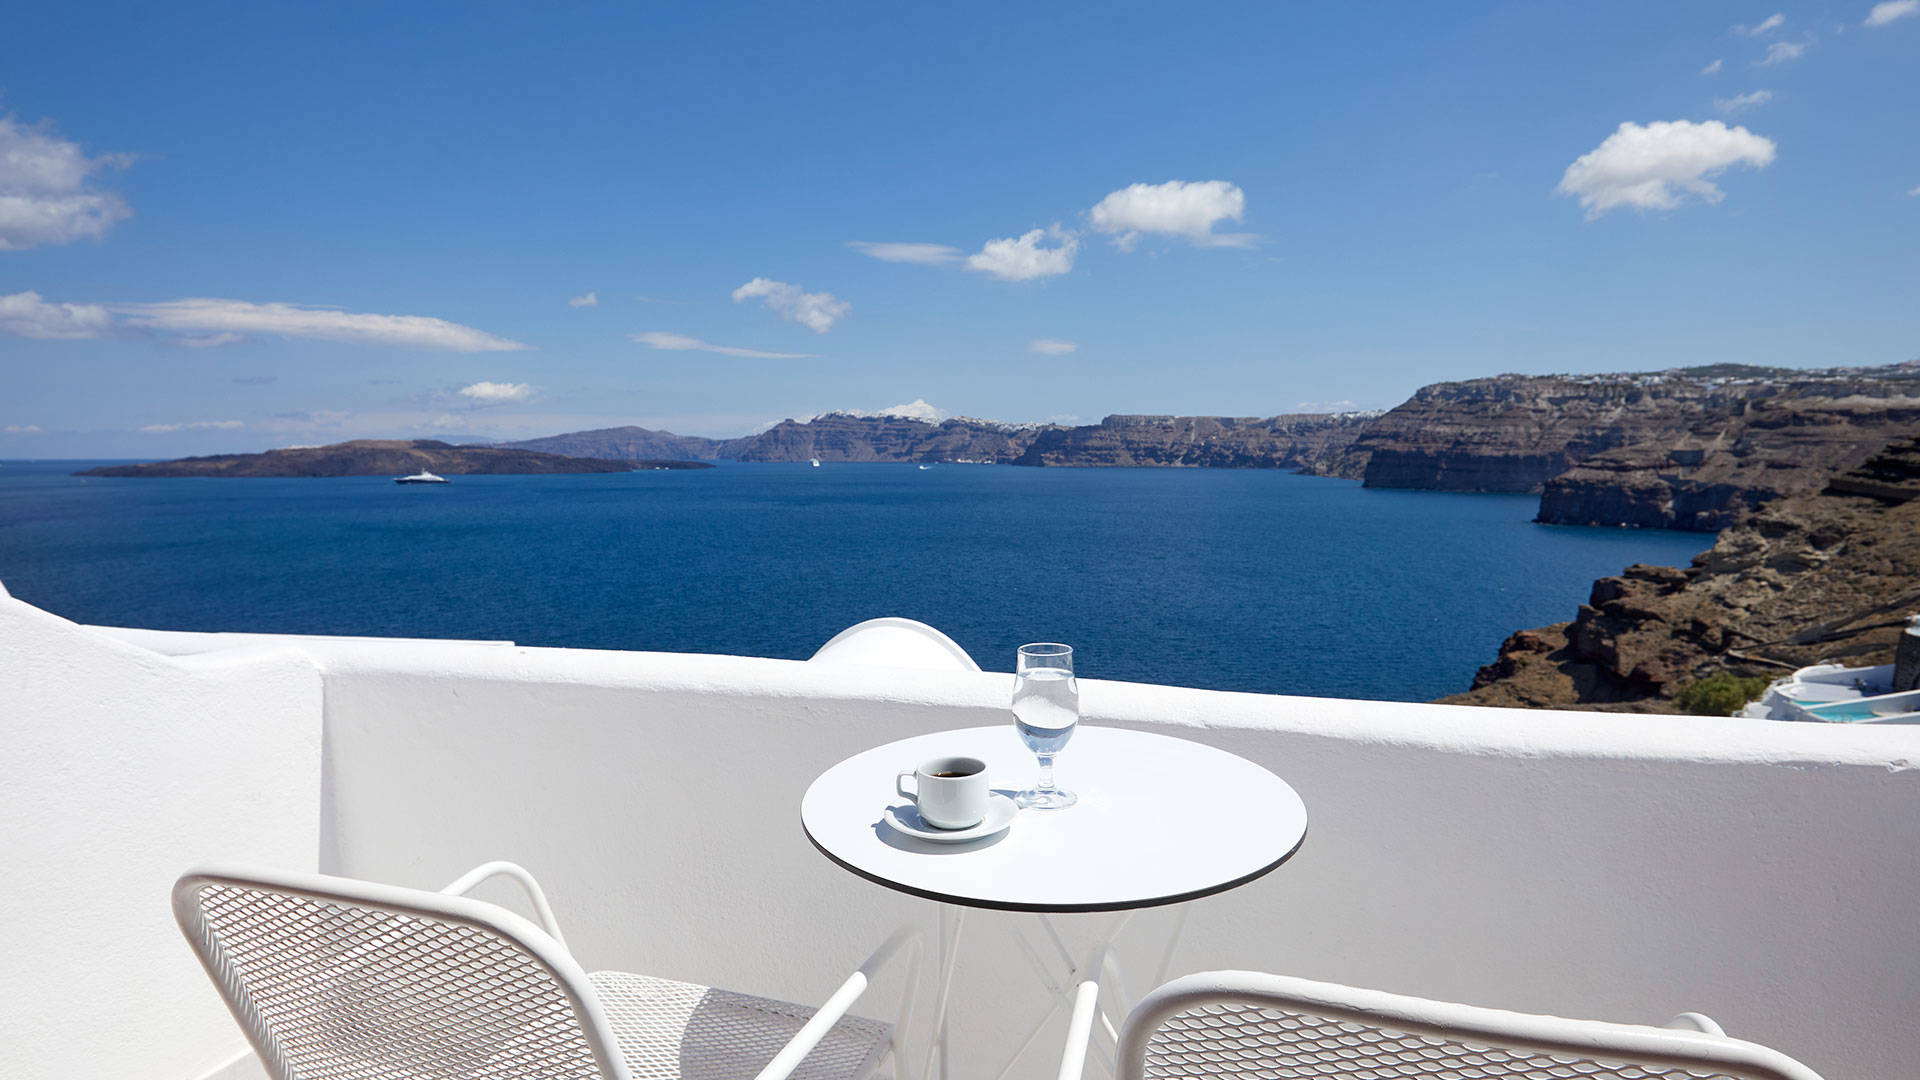 
Santorini sea View Hotel white table seats with greek coffee and glasses of water